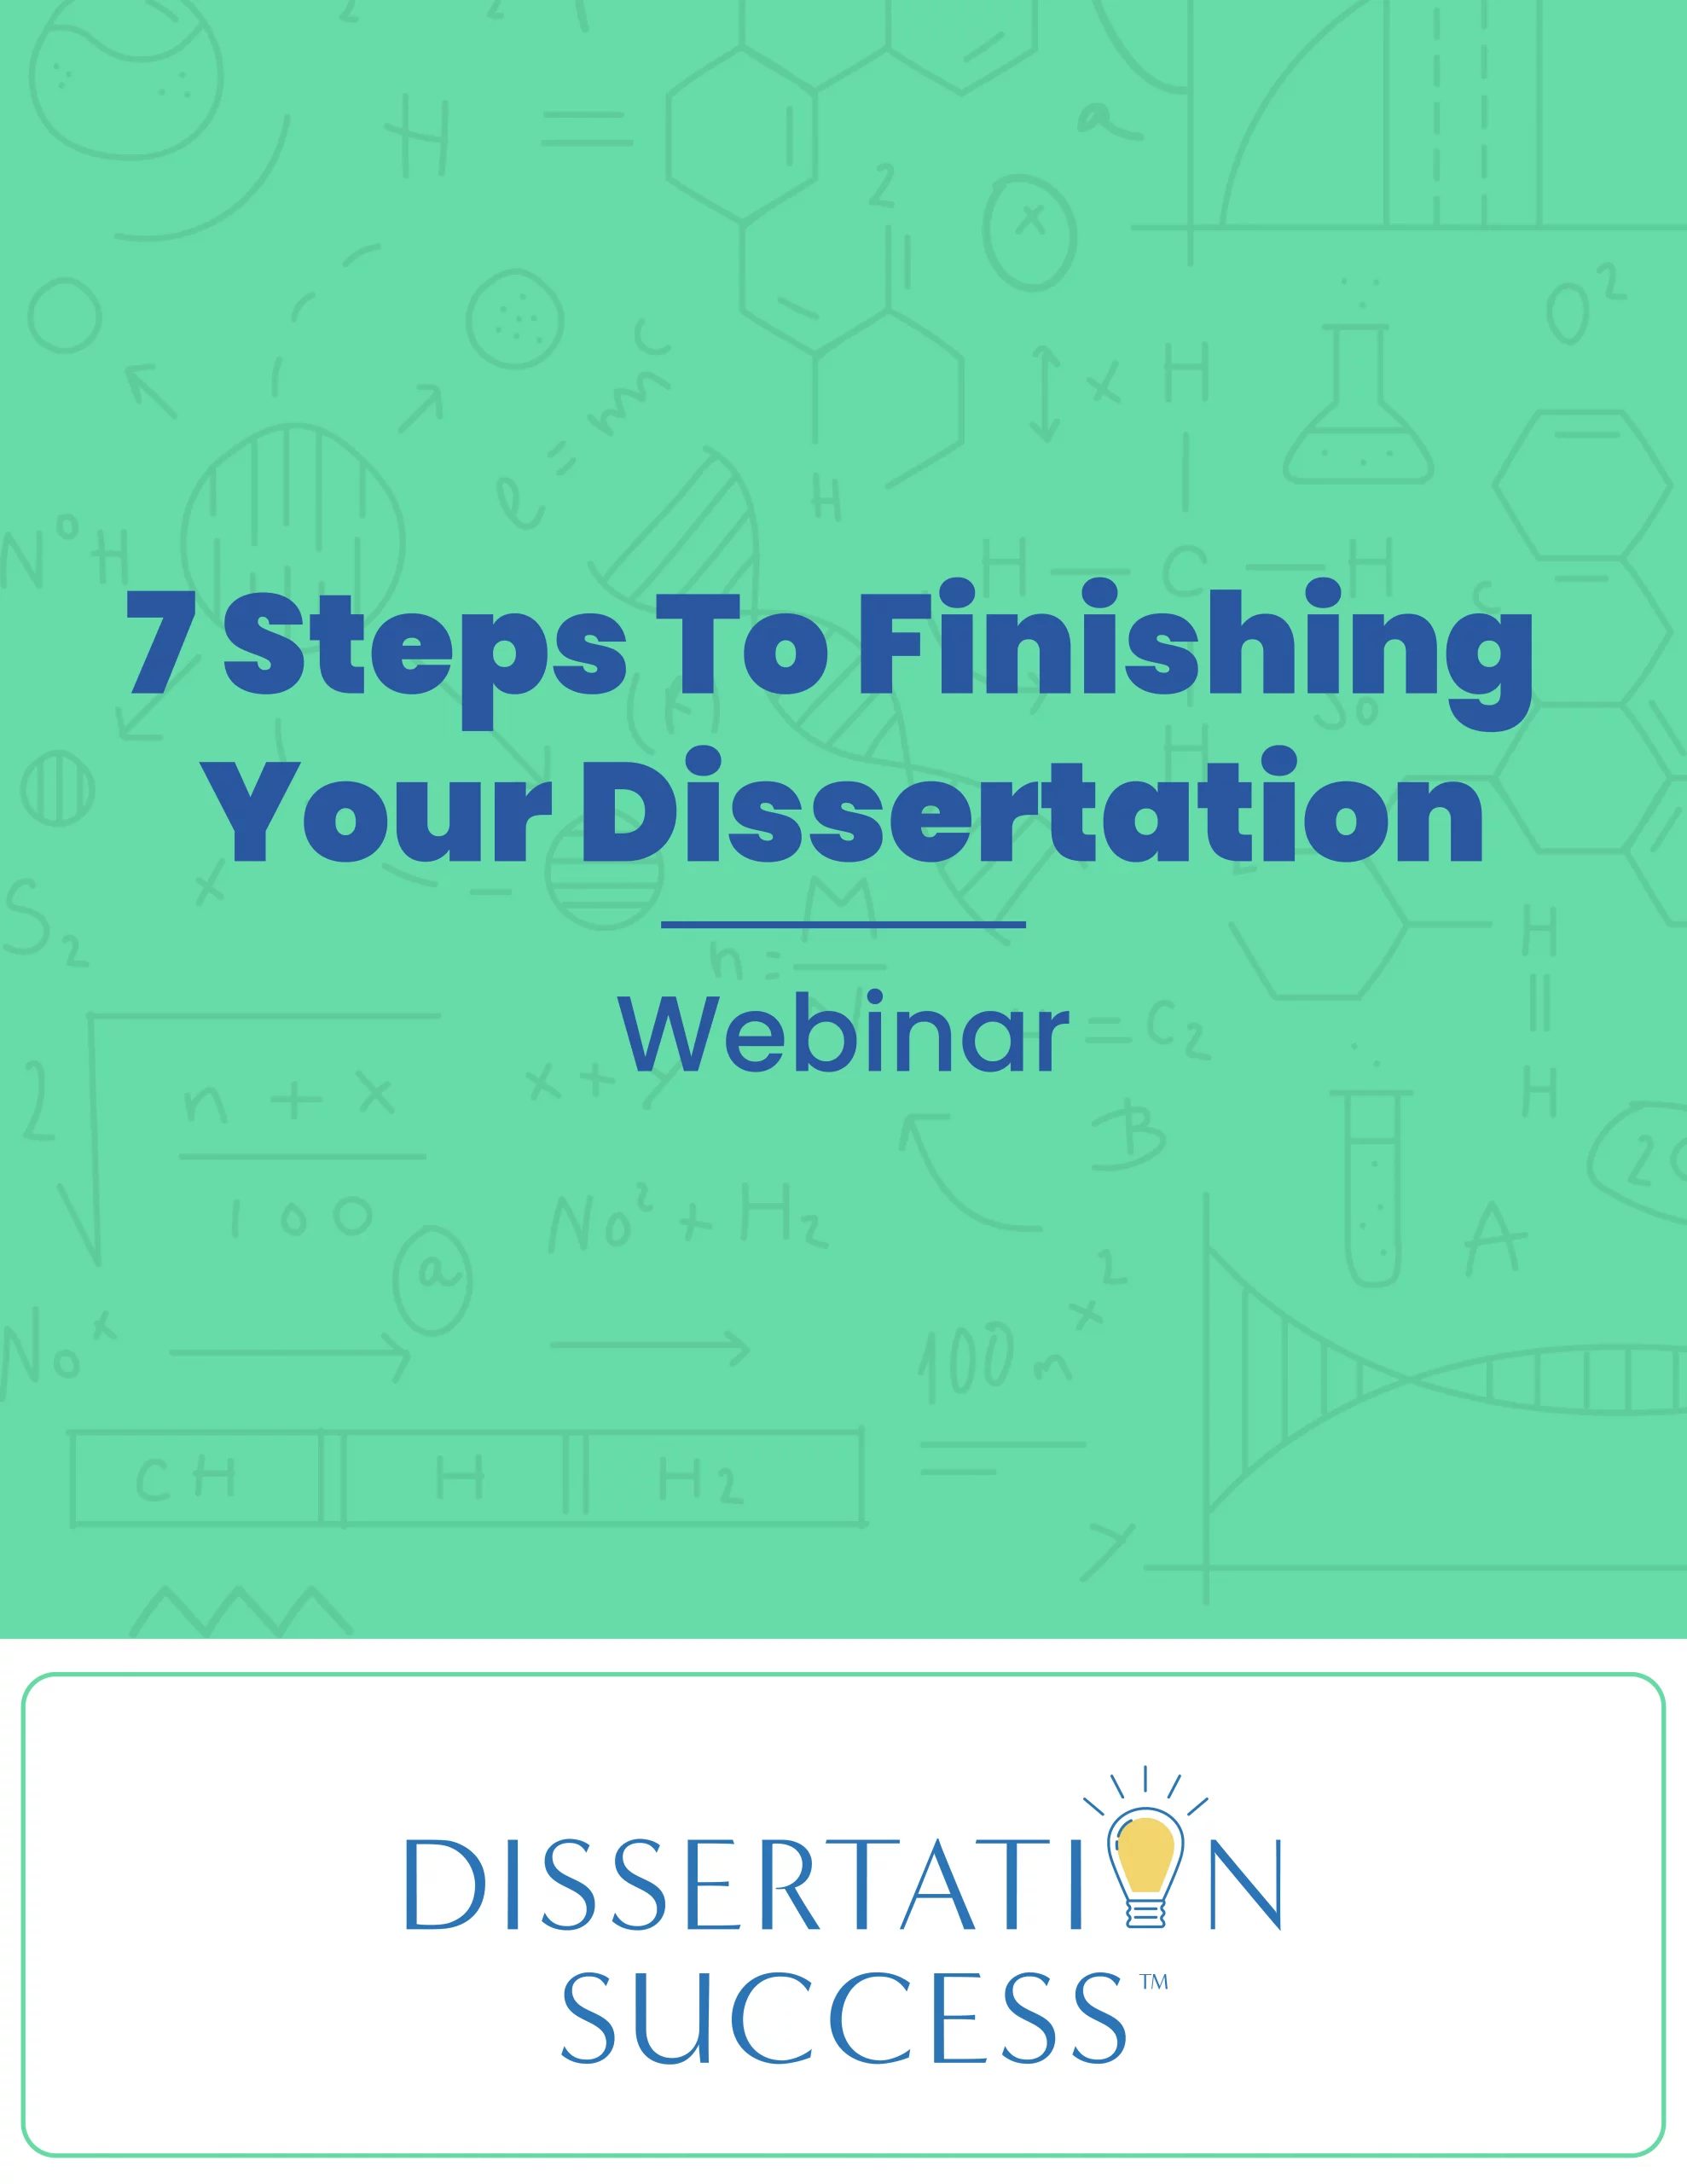 7 Steps To Finishing Your Dissertation